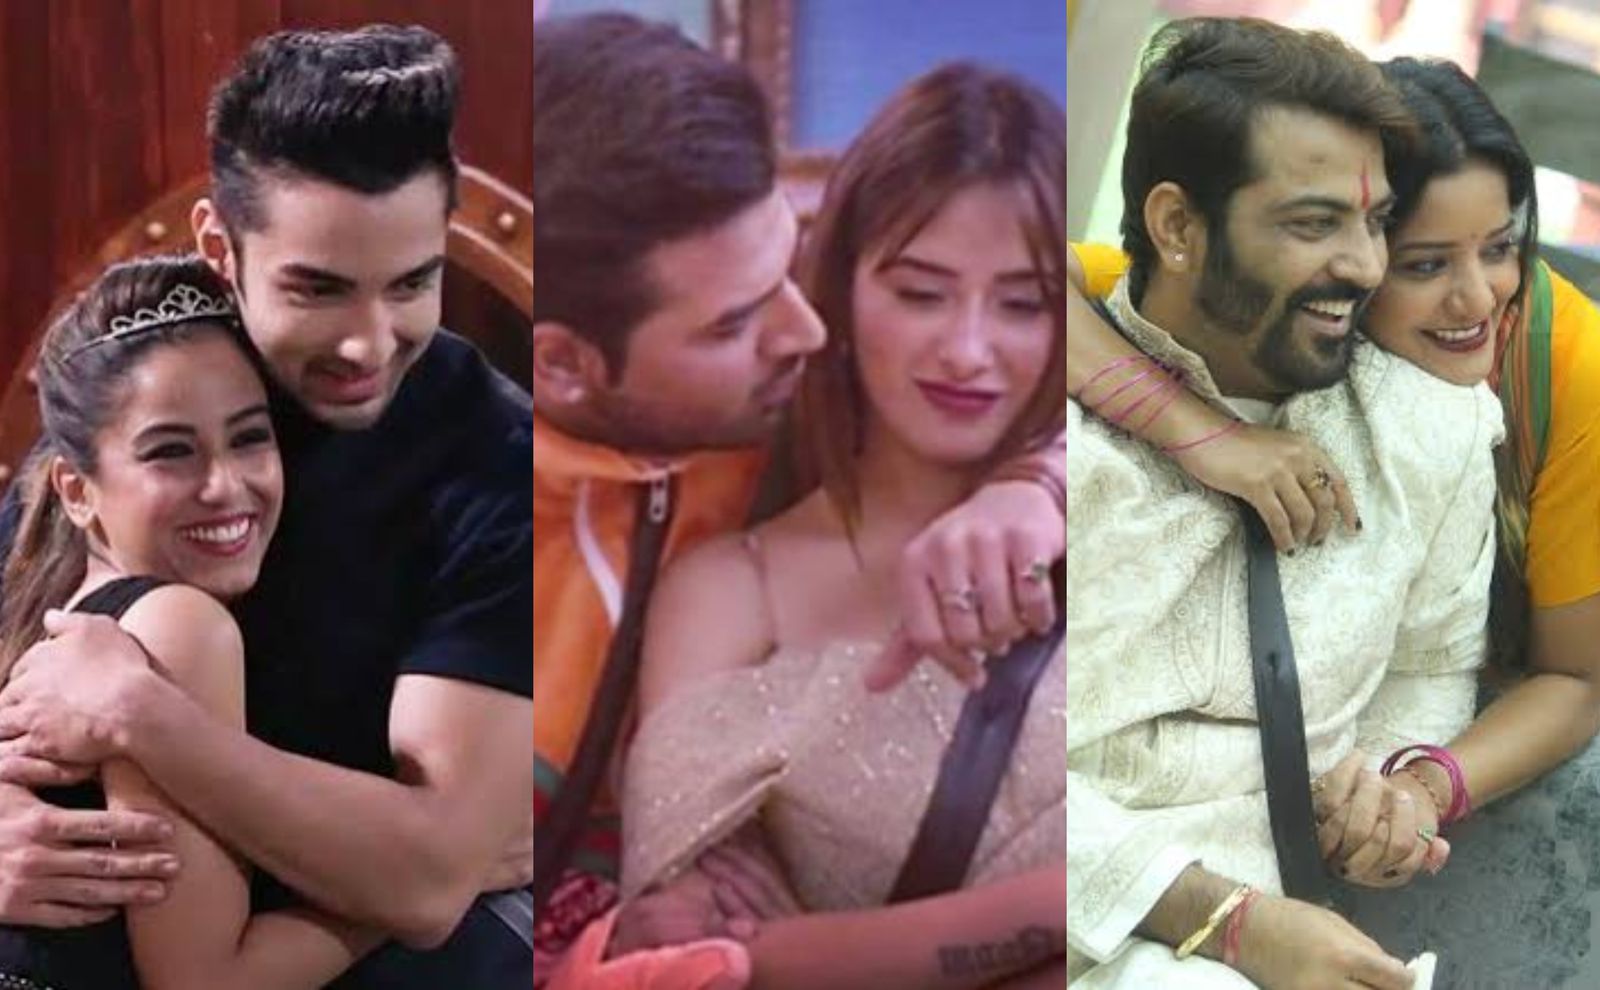 Bigg Boss 13: Just Like Paras-Mahira, These Relationships From Previous Seasons Led To Real Life Troubles For Contestants